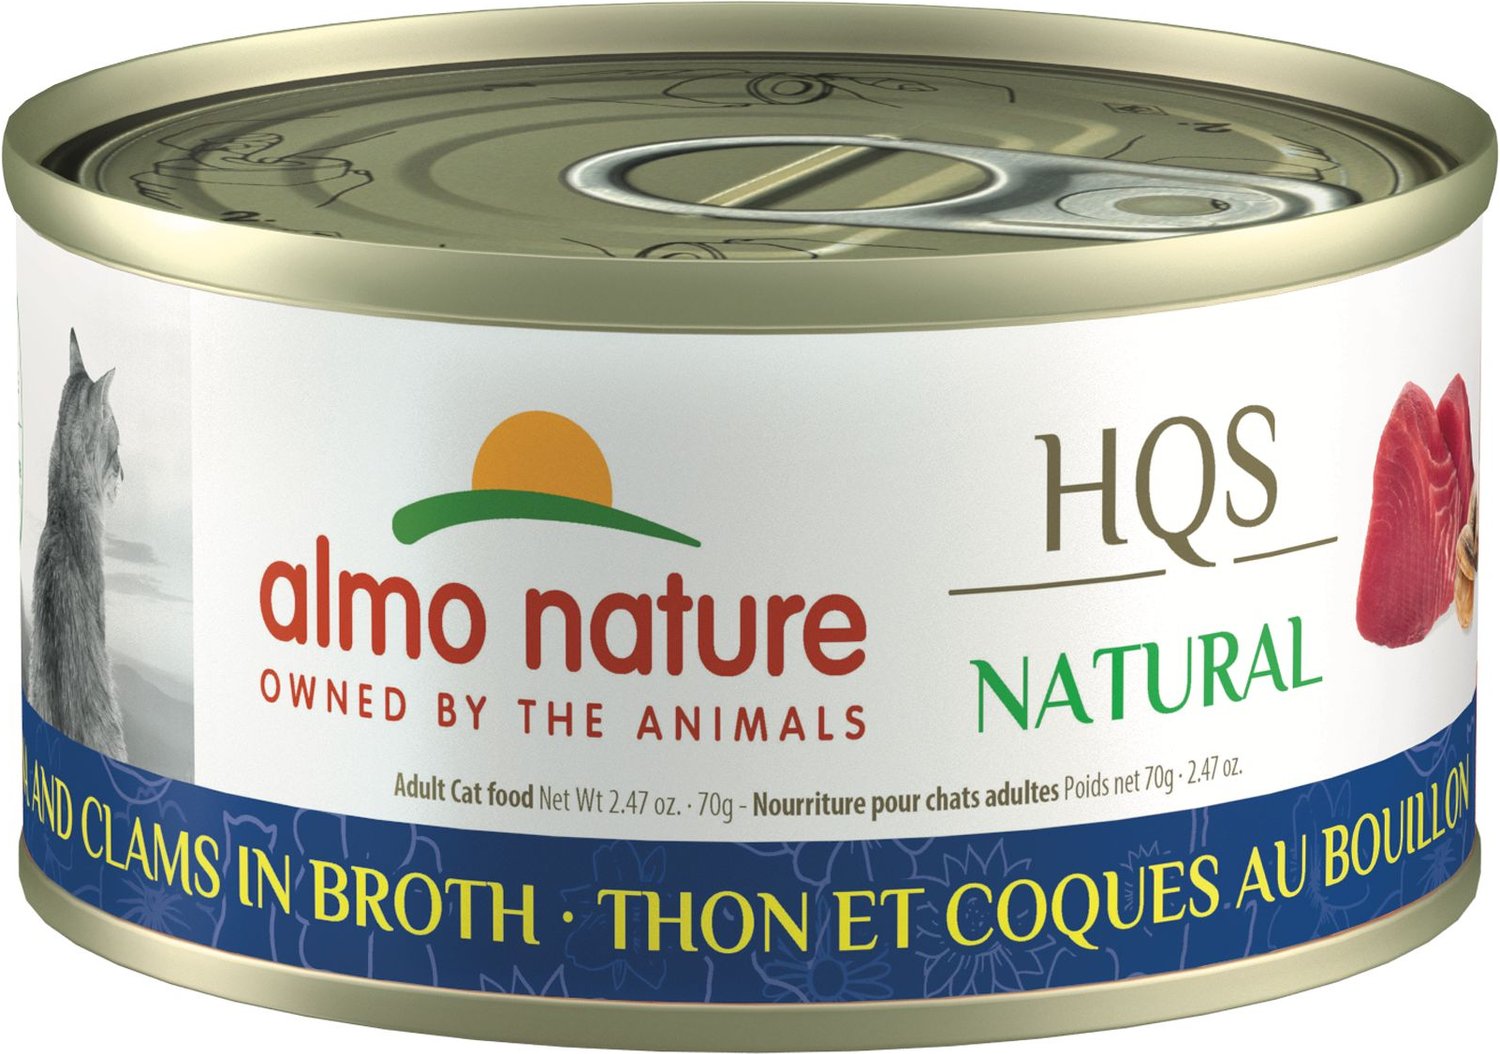 ALMO NATURE HQS Natural Tuna & Clams in Broth Grain-Free Canned Cat Food,  2.47-oz, case of 24 - Chewy.com